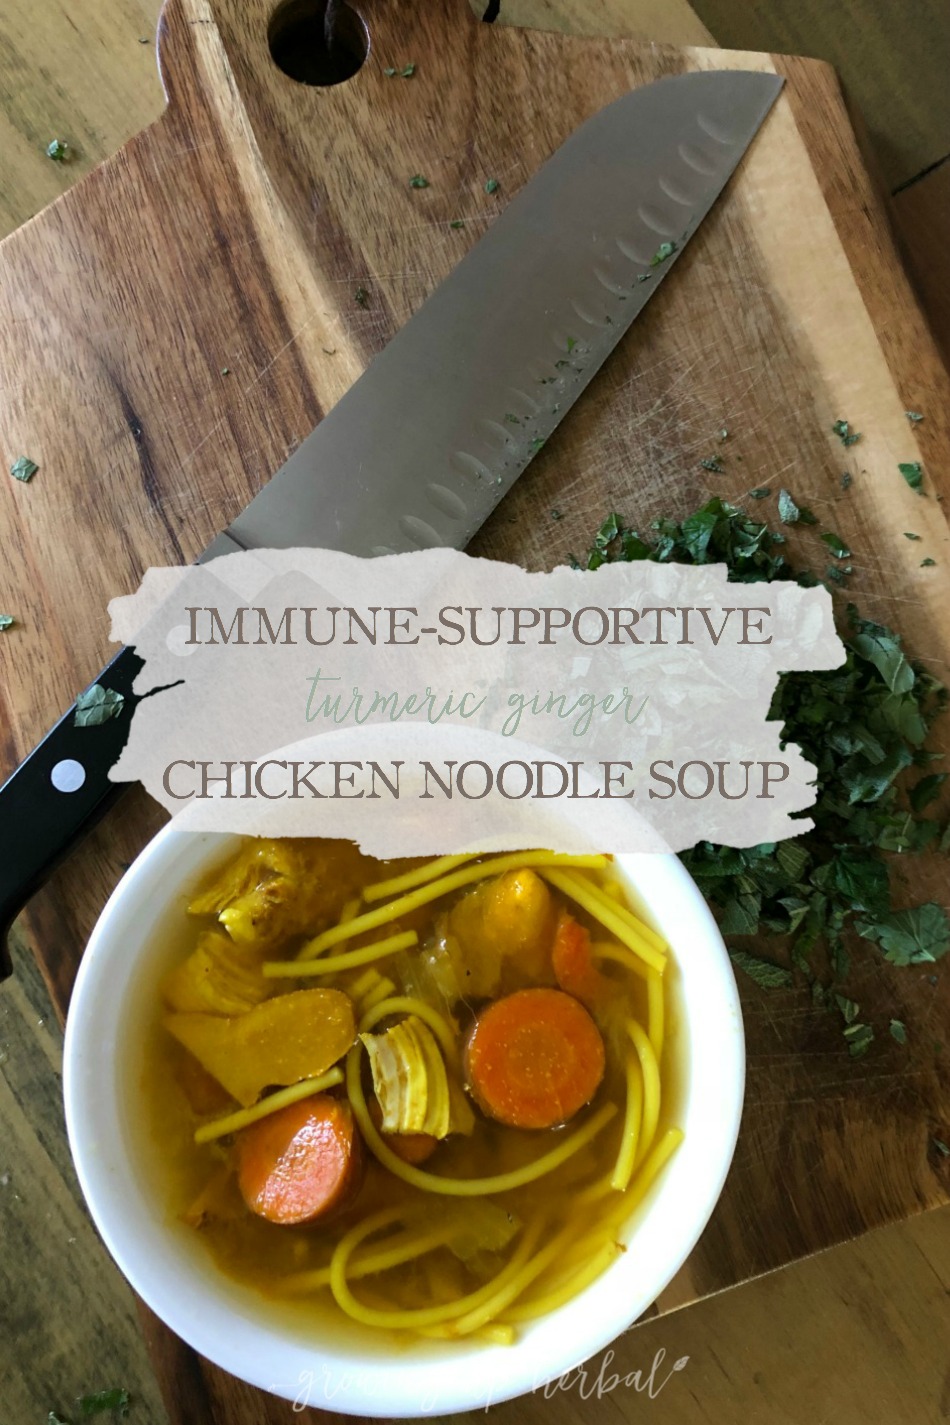 Immune-Supportive Turmeric-Ginger Chicken Noodle Soup | Growing Up Herbal | If you're looking for healthy foods for cold and flu season, you won't want to miss this spicy, immune-supportive turmeric-ginger chicken noodle soup!